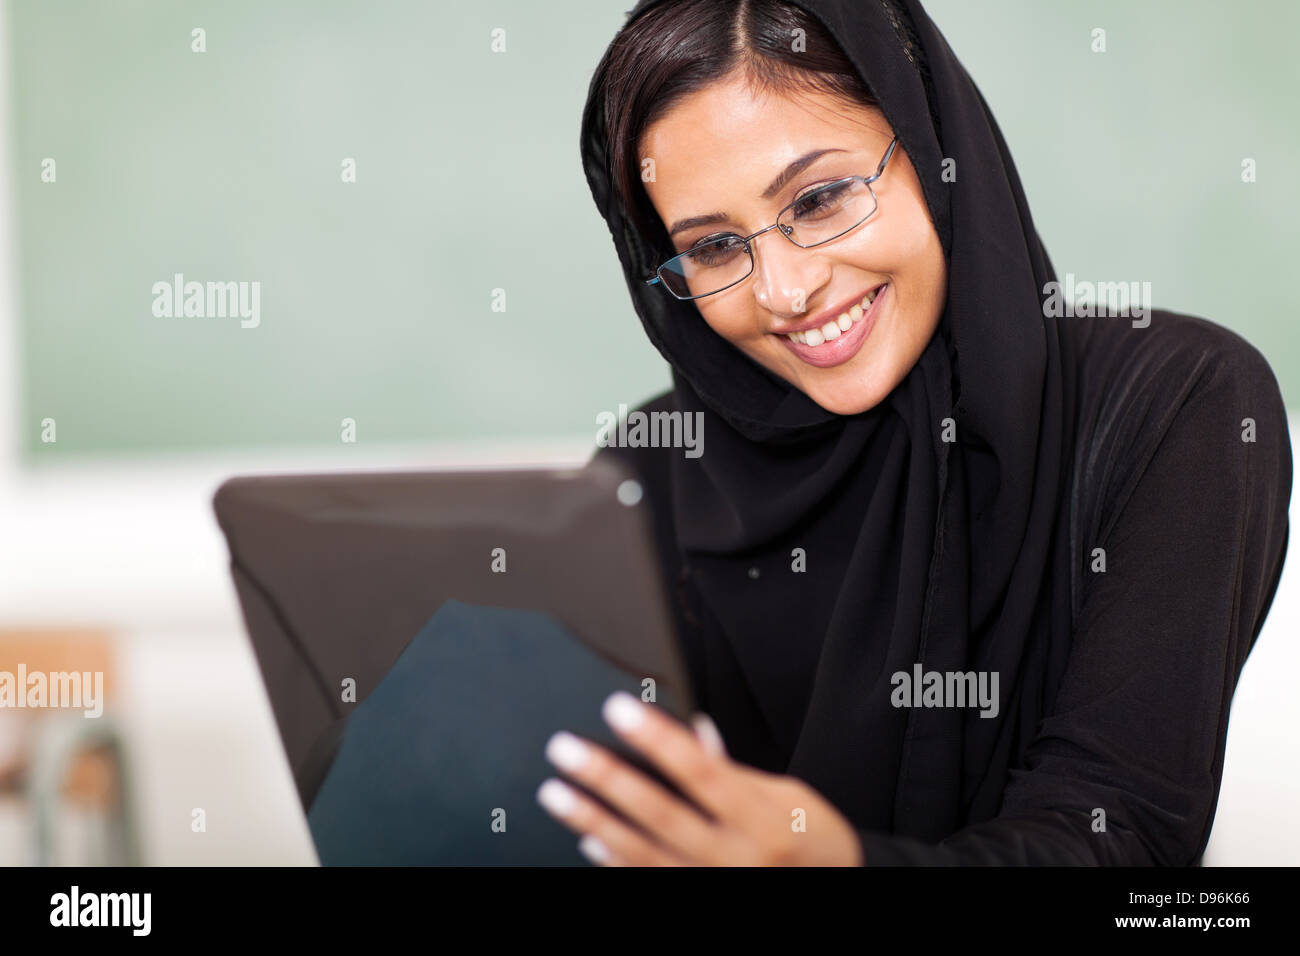 female Muslim college student using tablet computer in classroom Stock Photo